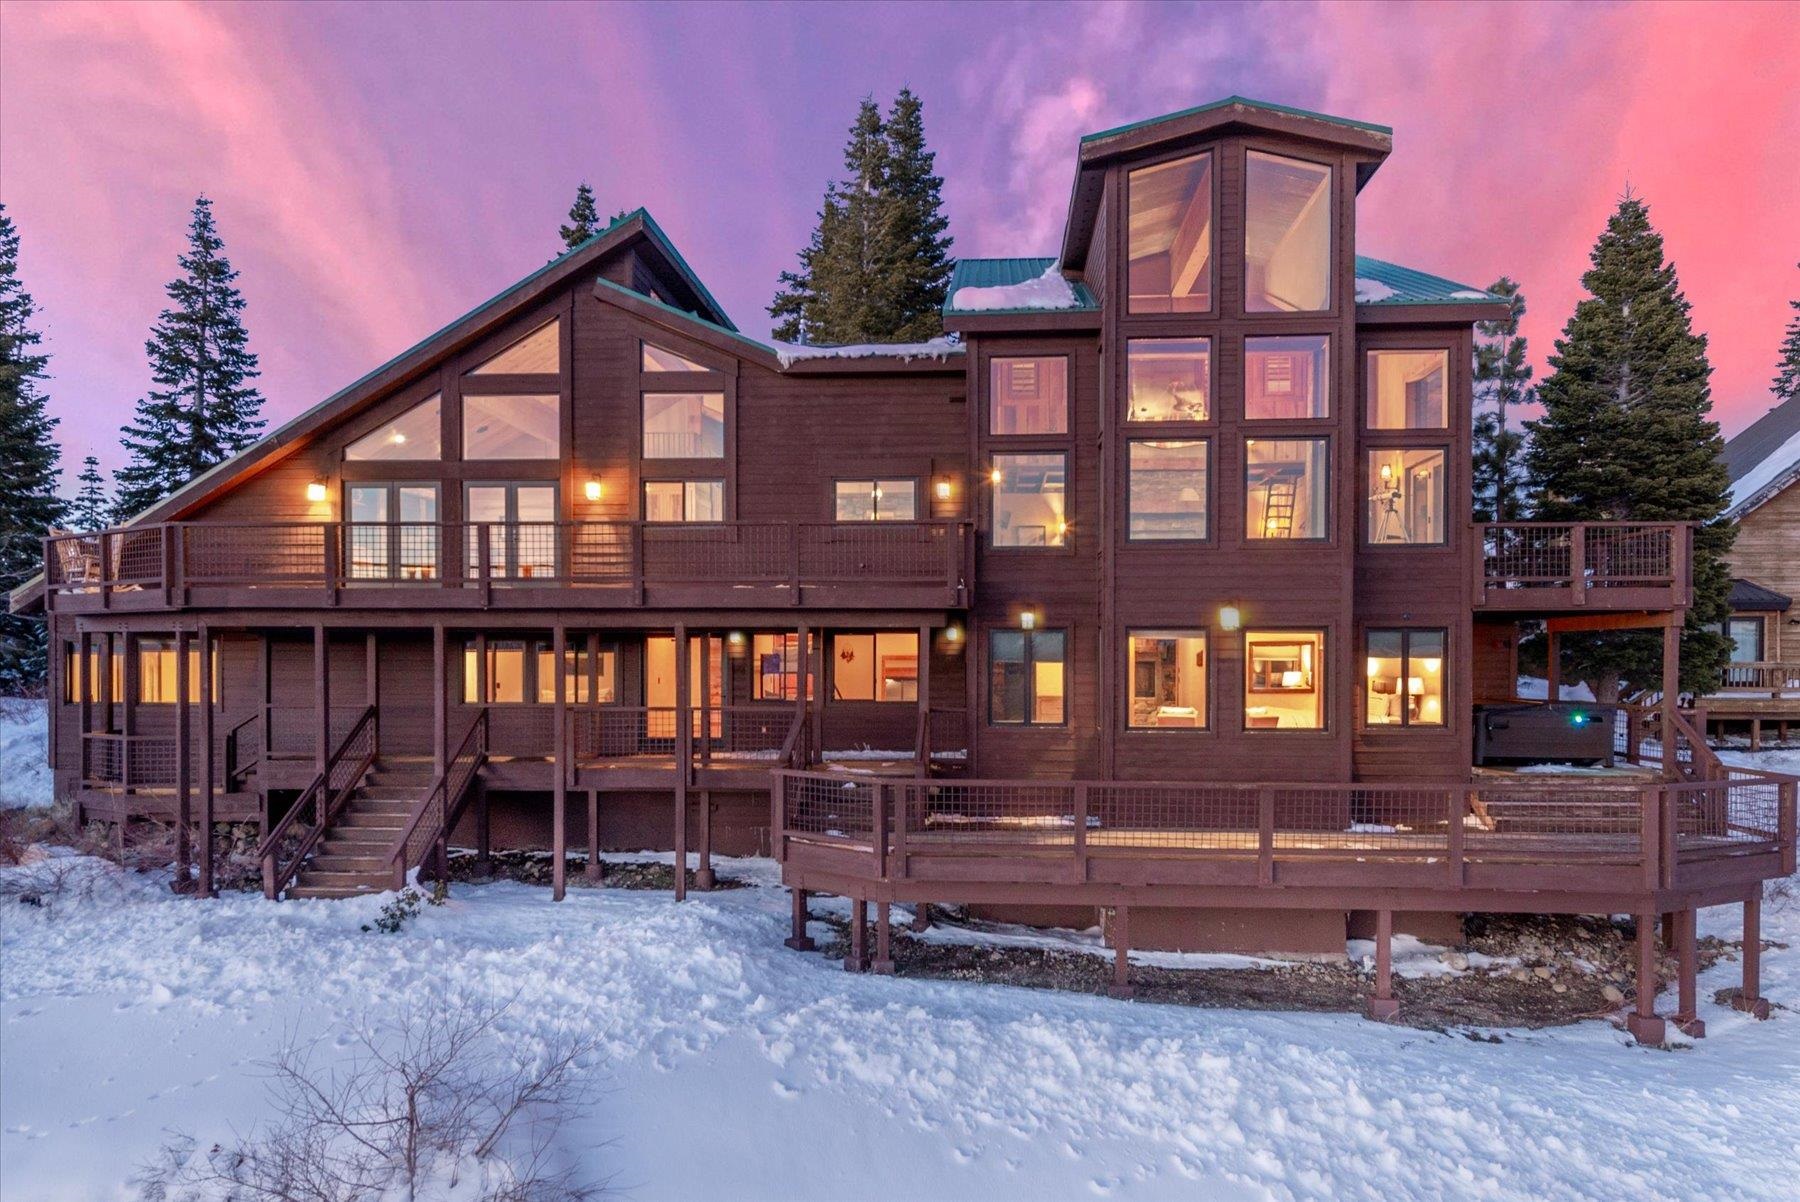 Image for 12332 Skislope Way, Truckee, CA 96161